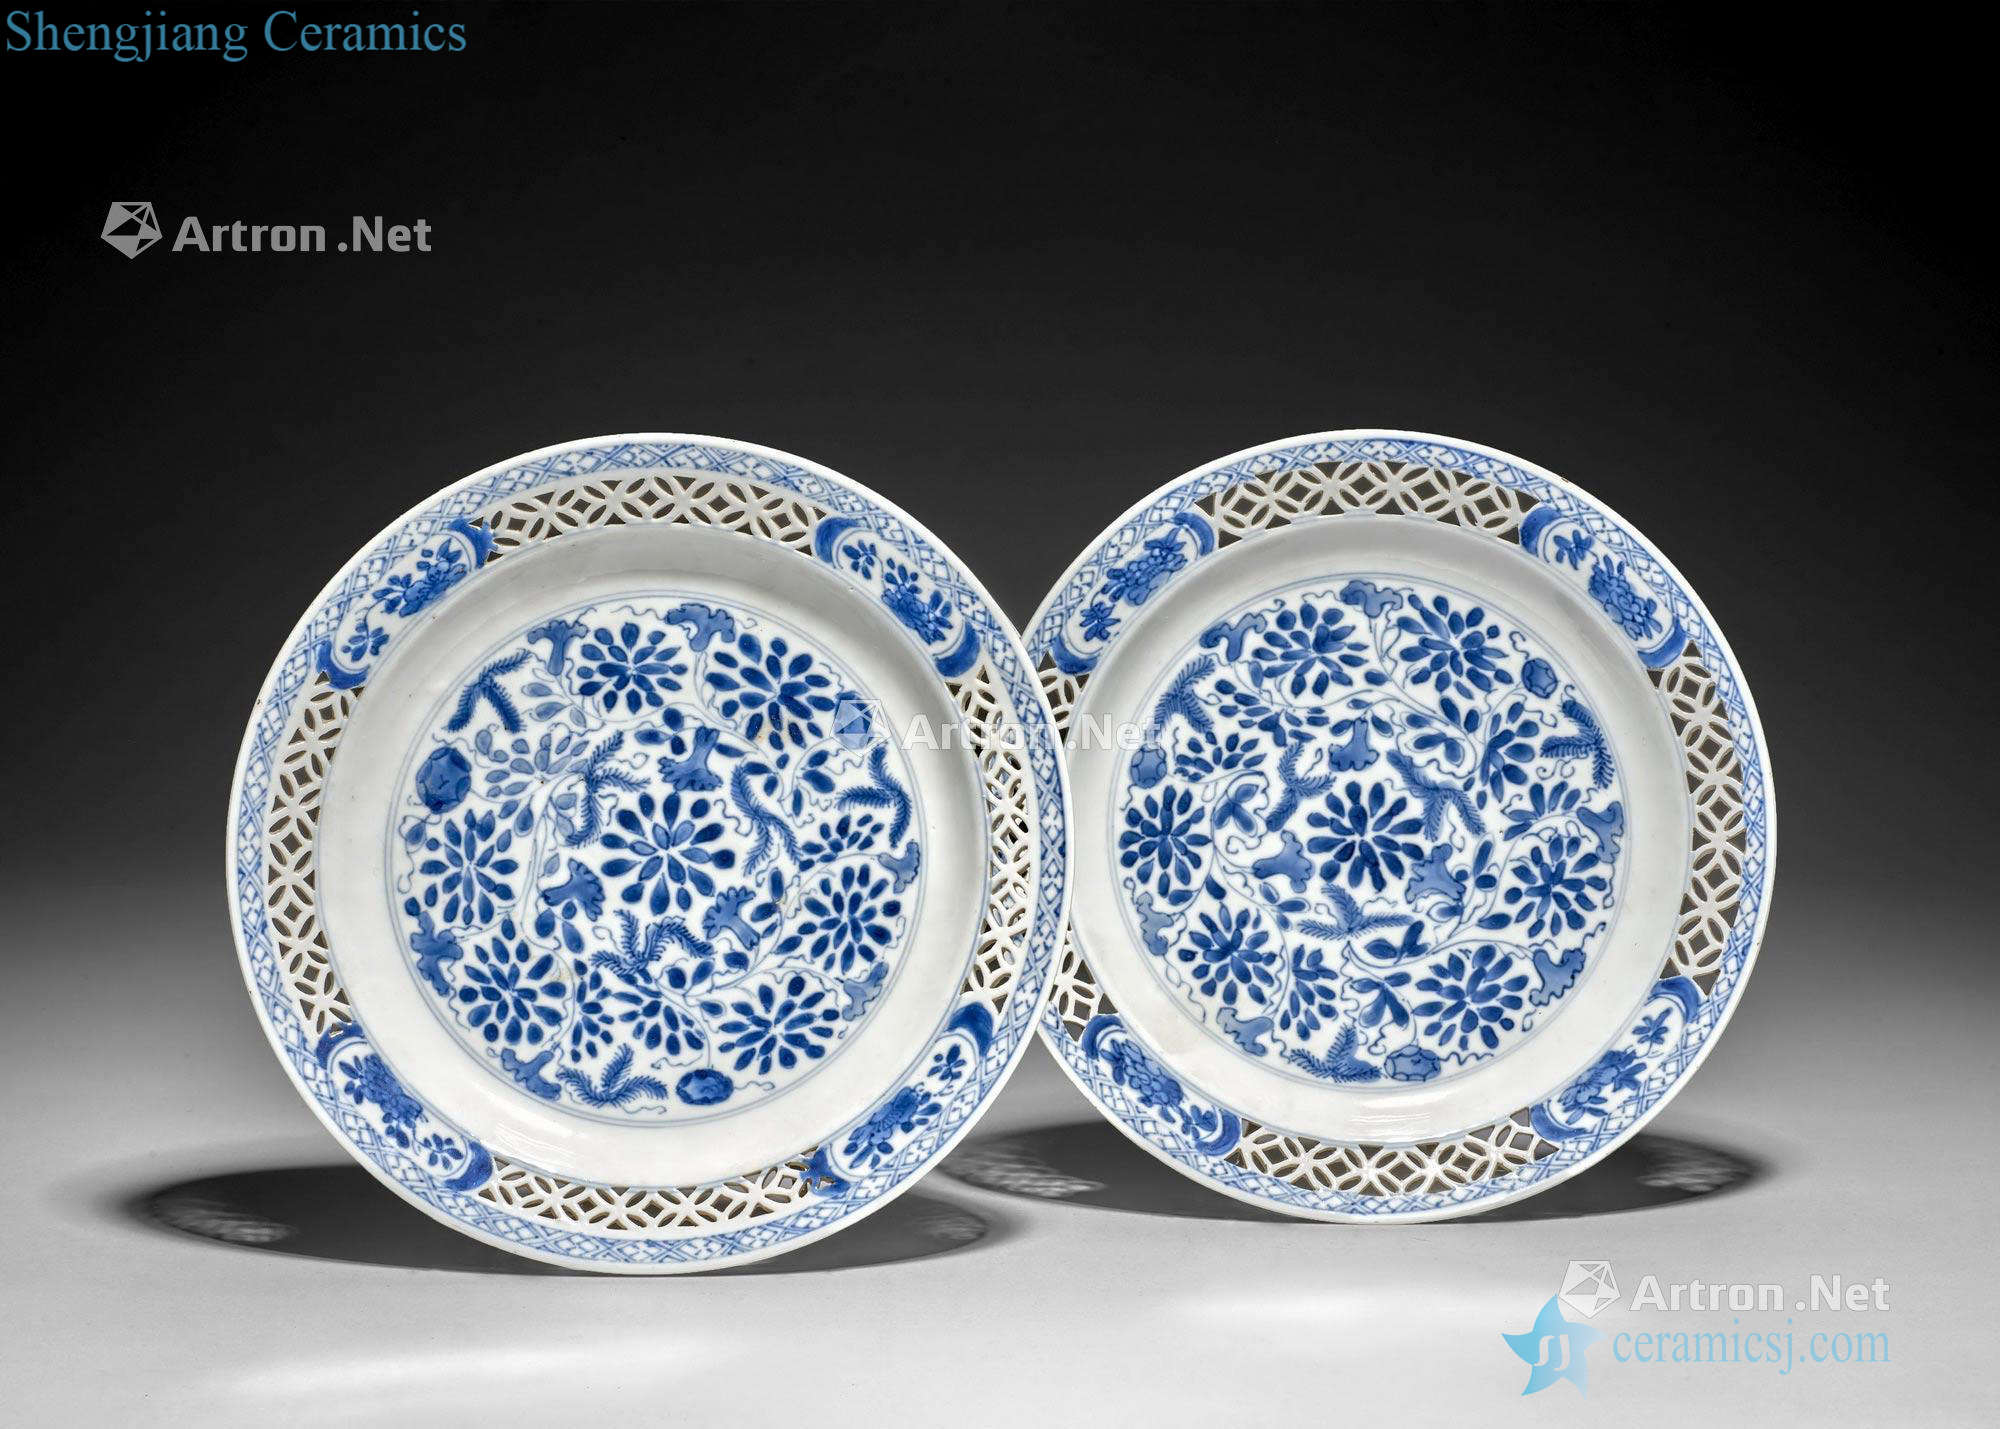 China, the Qing dynasty, Kangxi period (1662-1722), A pair of blue and white porcelain plates